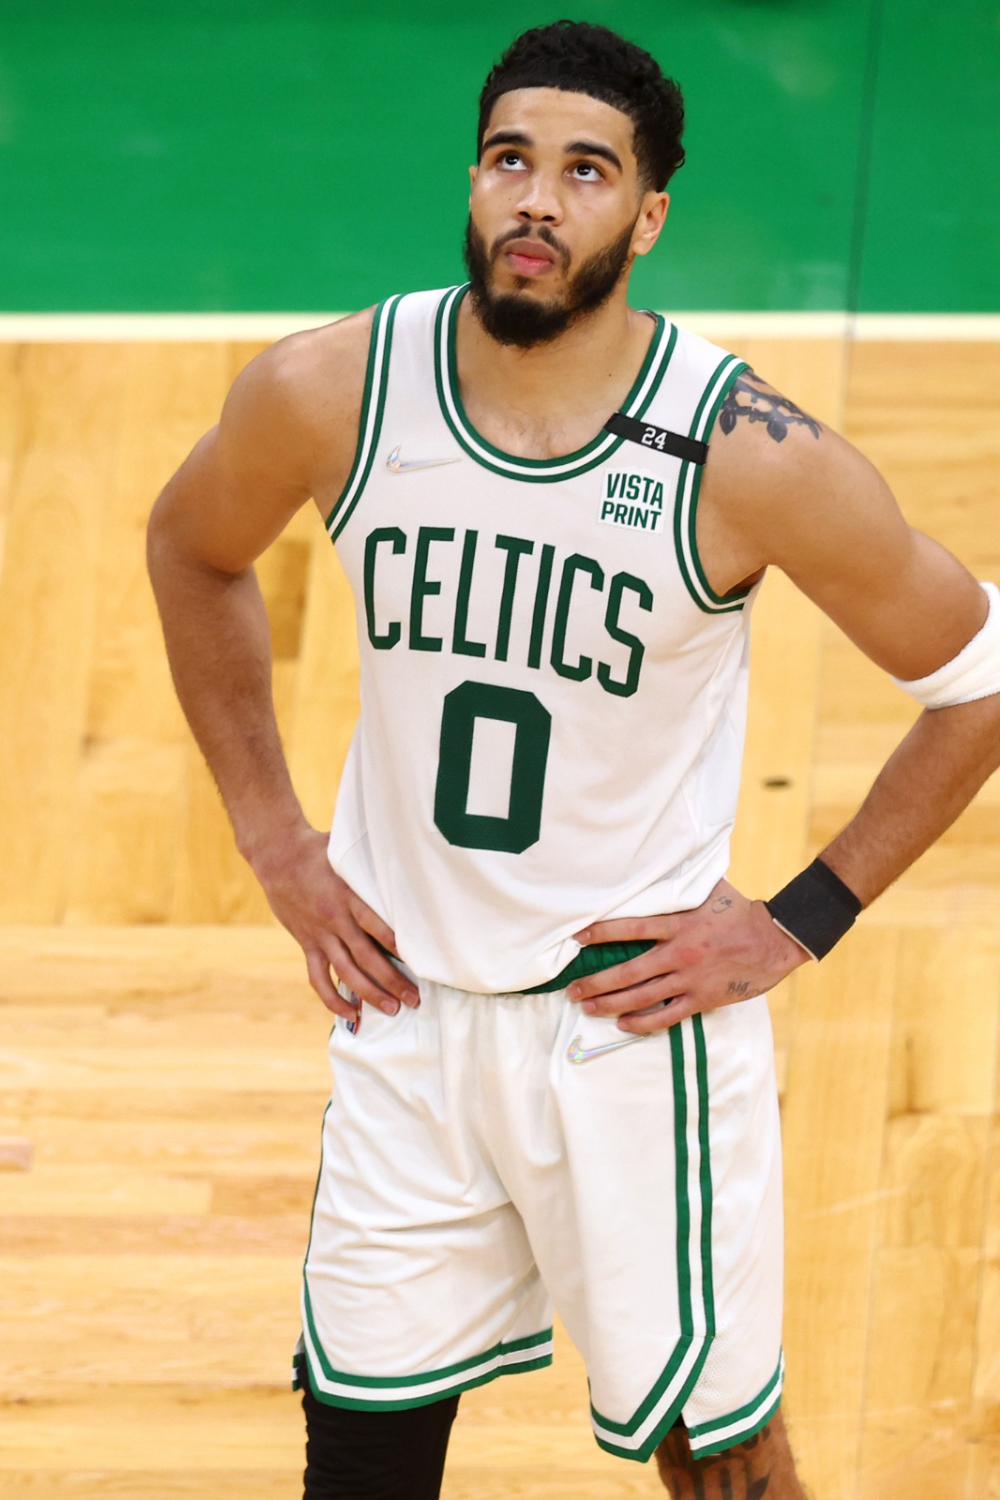 Boston Celtics Player Jayson Looks Disappointed After The Loss (Source: Chowder